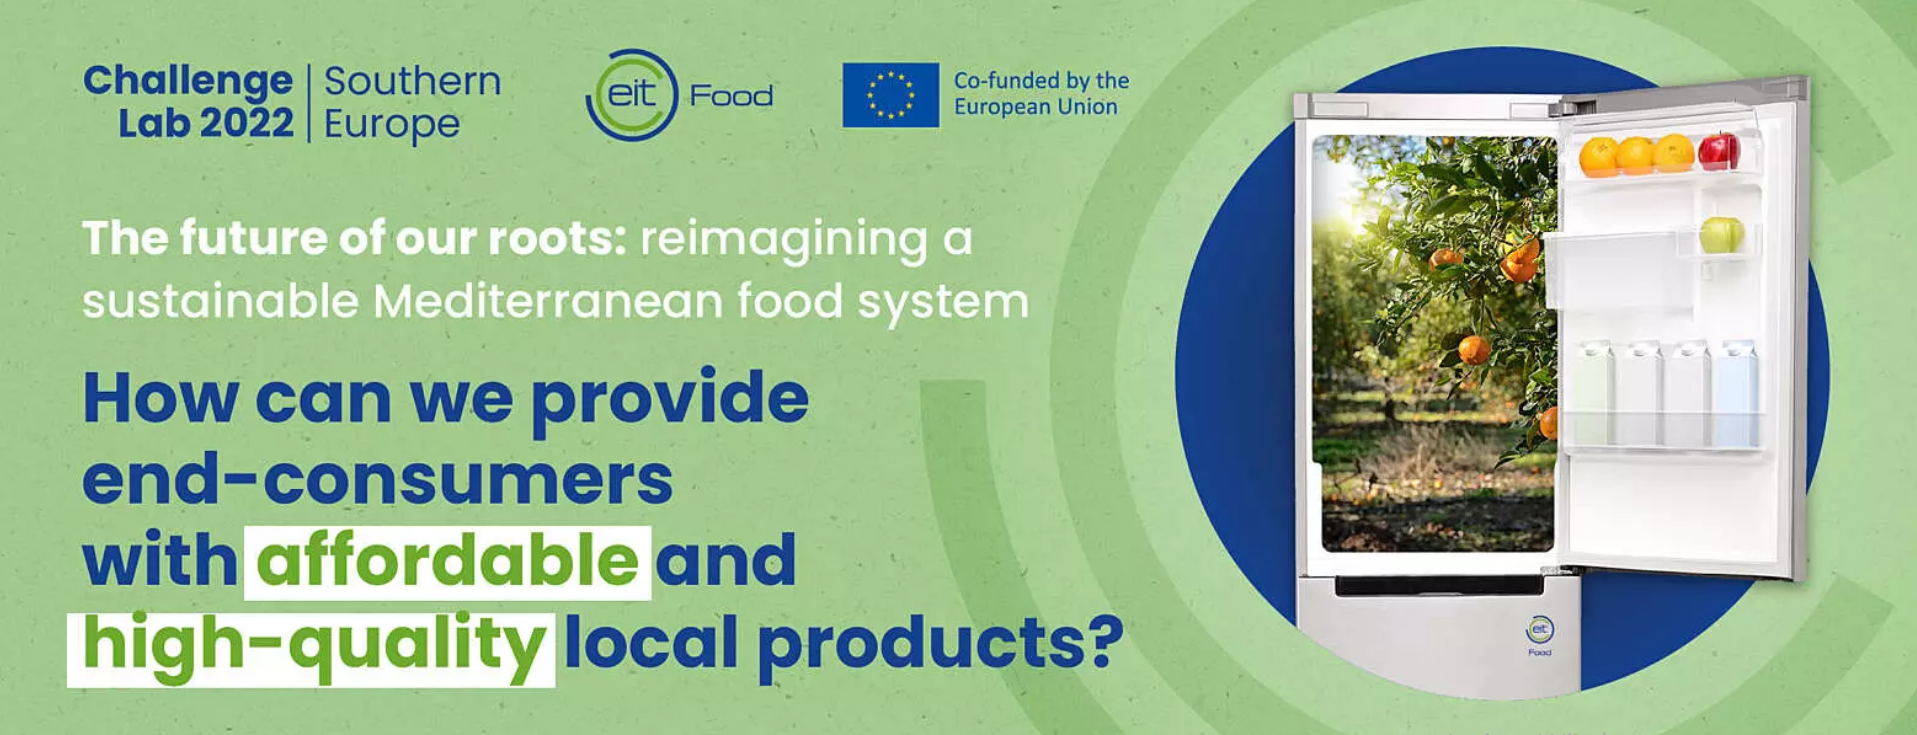 How can we provide end-consumers with affordable and high-quality local products?